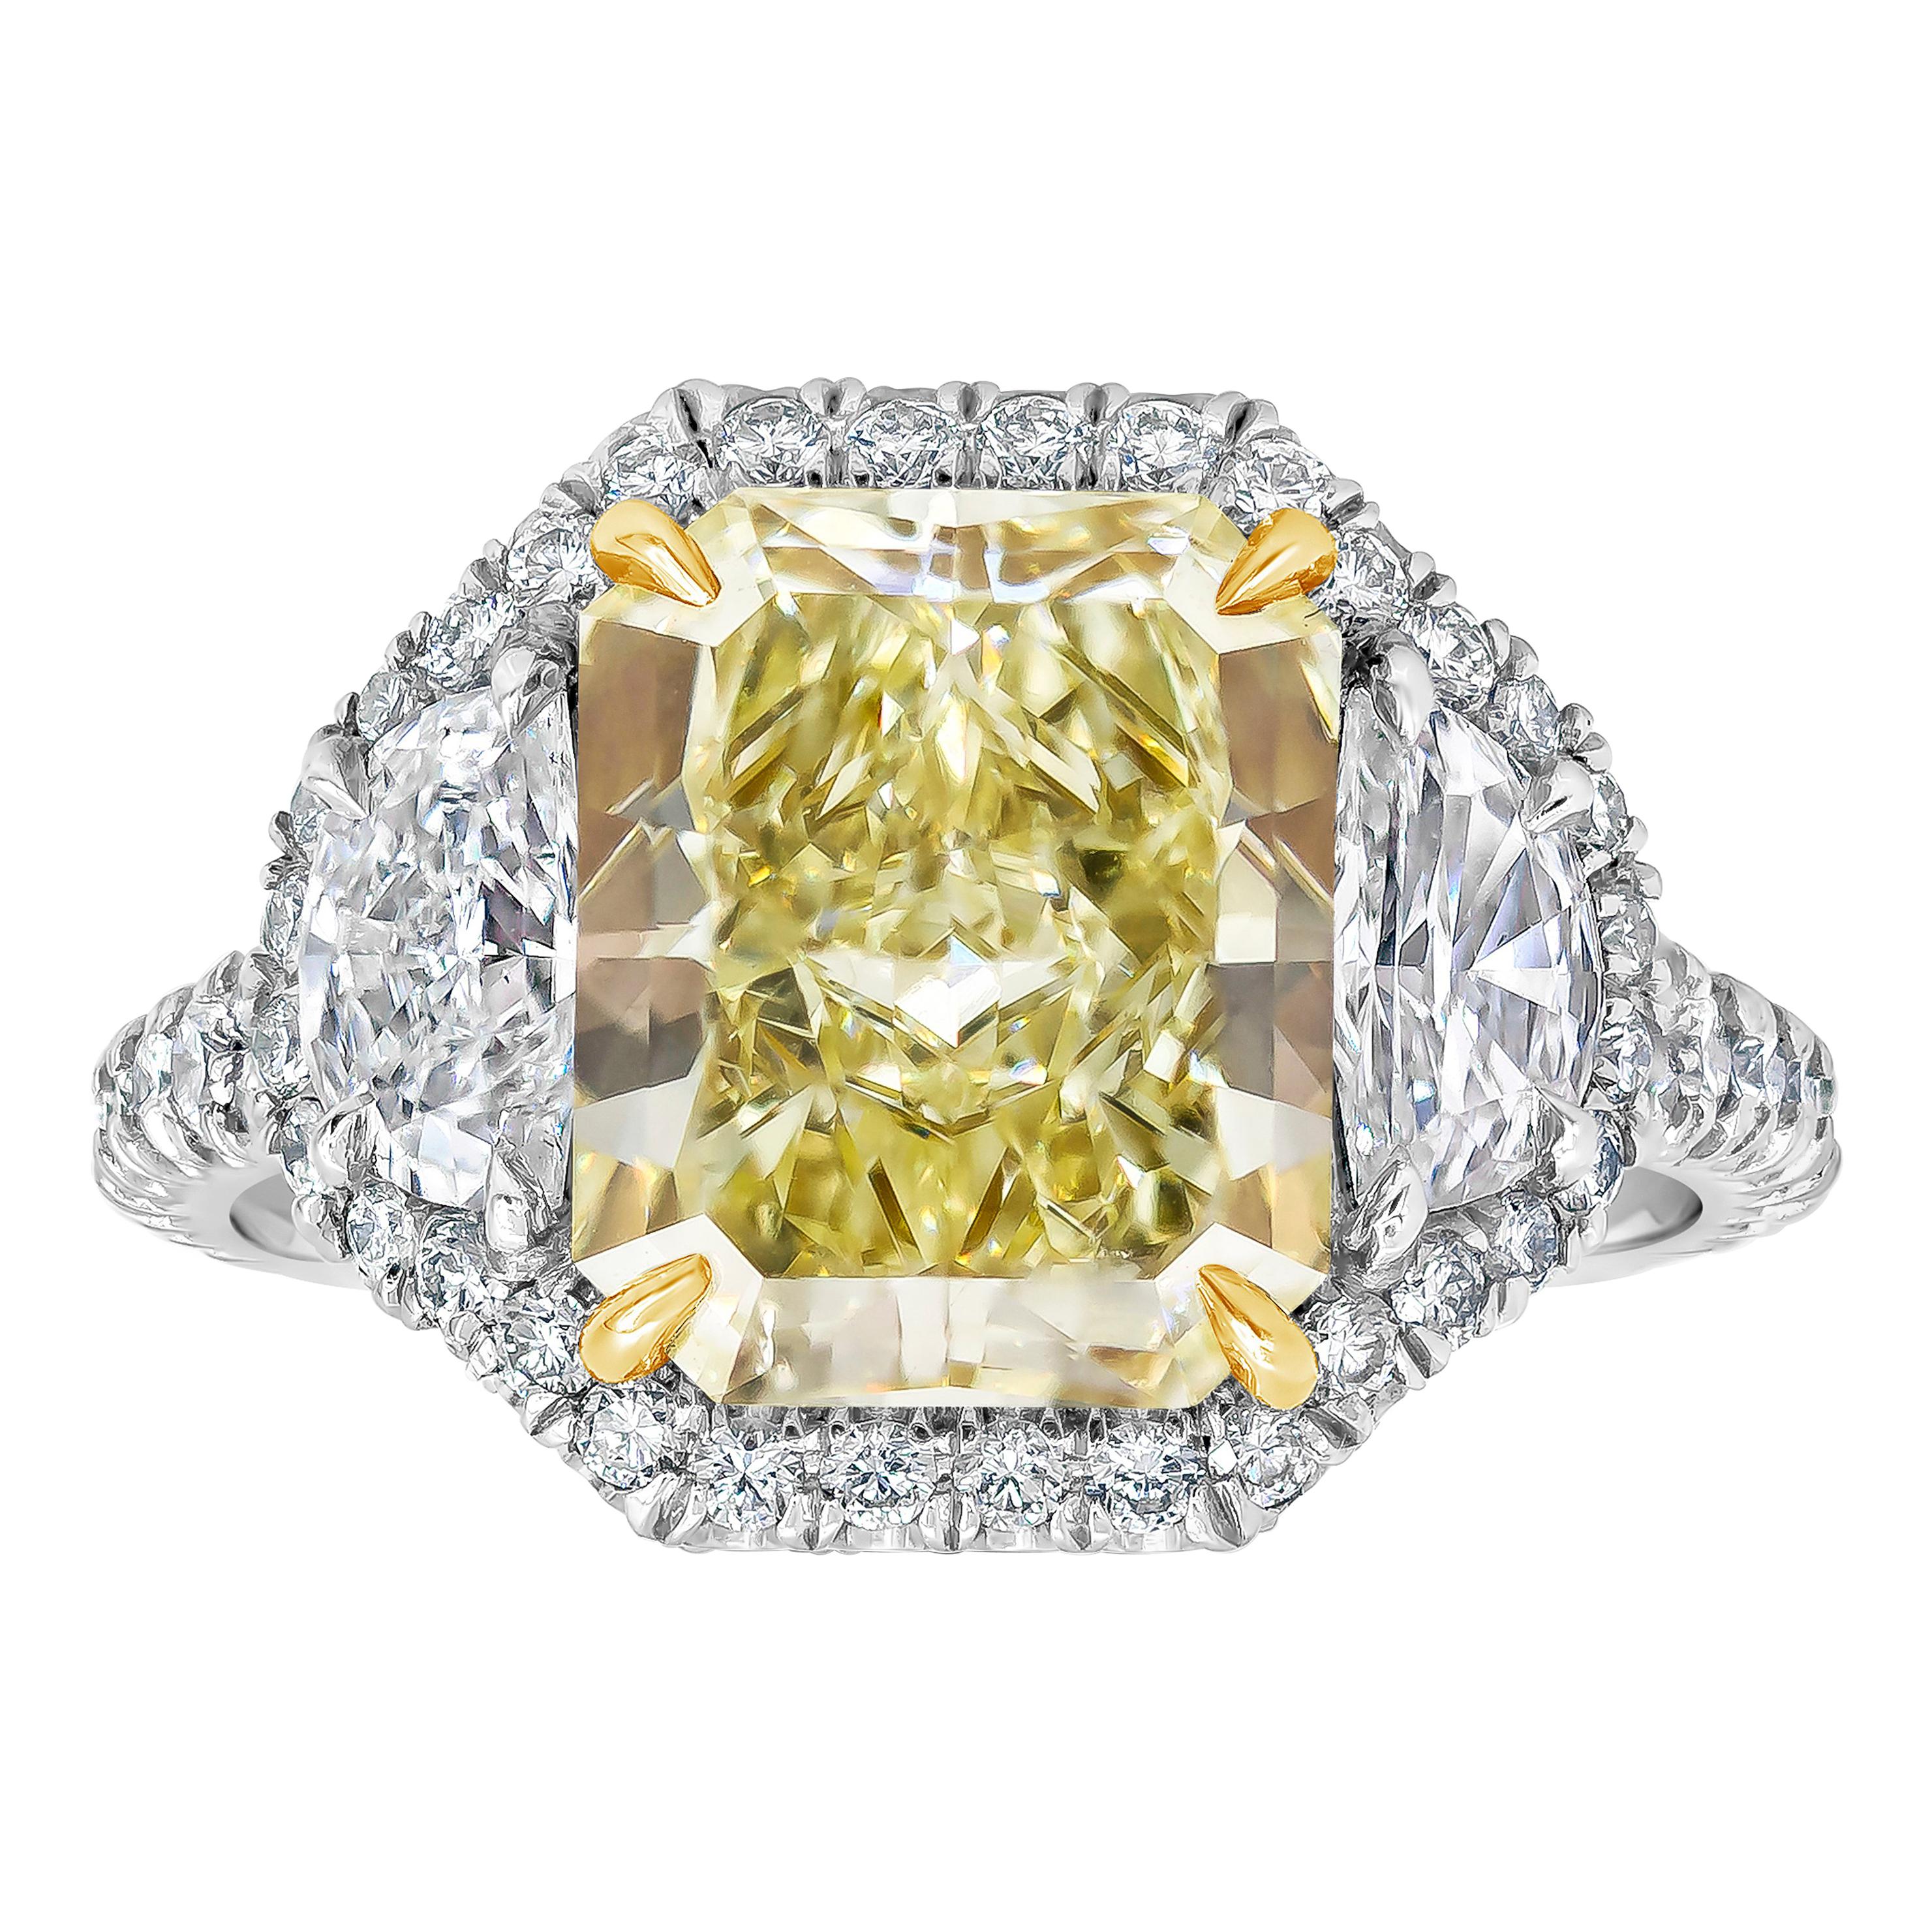 3.64 Carats Total Radiant Cut Yellow Diamond Halo Three-Stone Engagement Ring For Sale